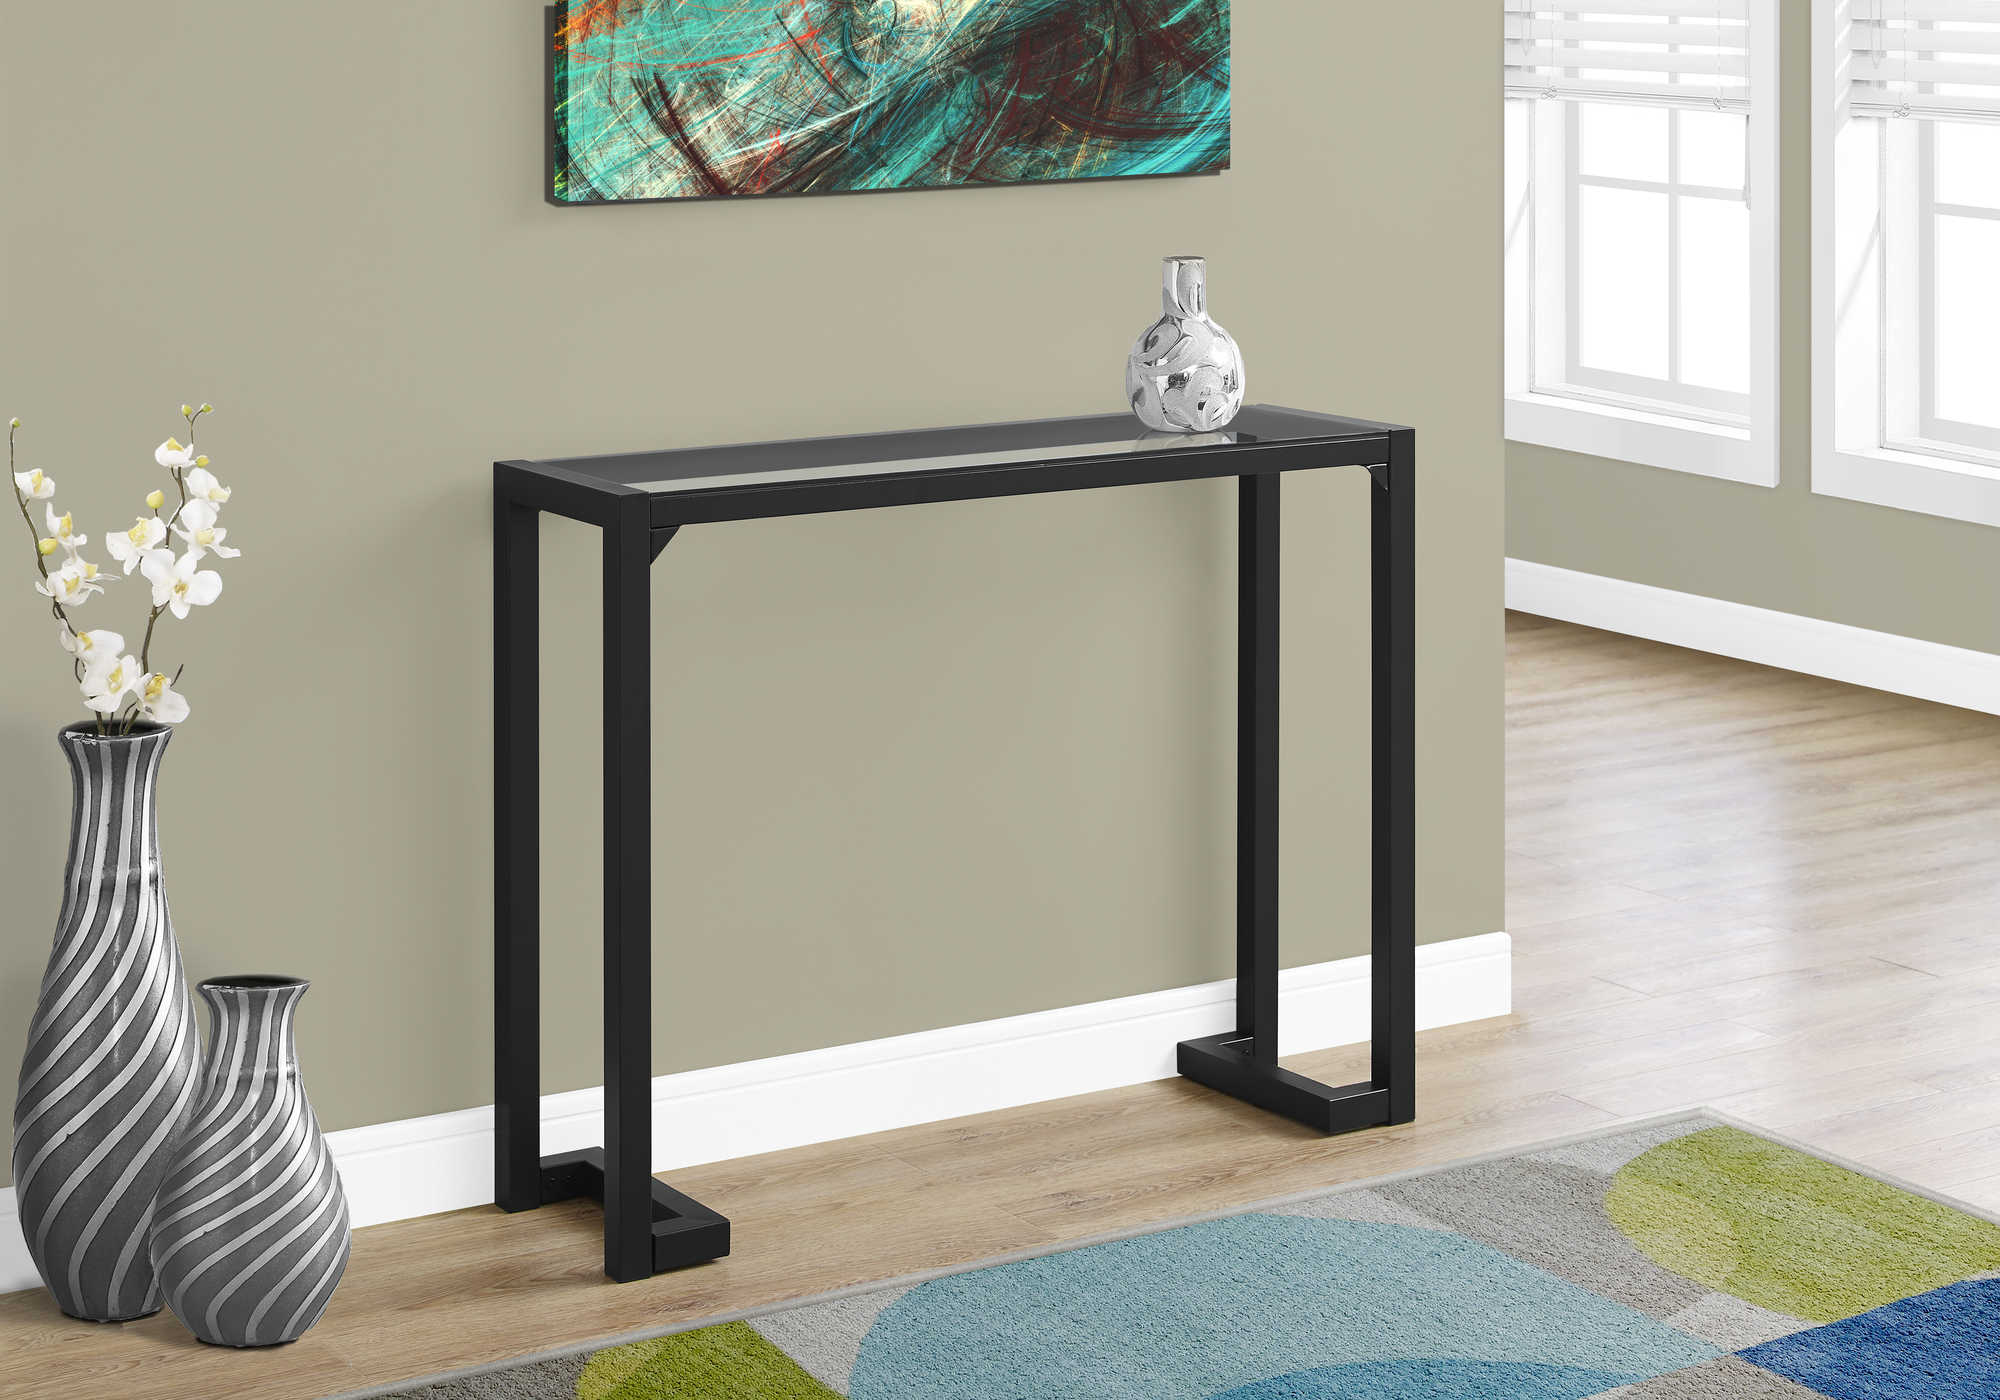 BEDROOM ACCENT CONSOLE TABLE - 42"L / BLACK / TEMPERED GLASS HALL CONSOLE